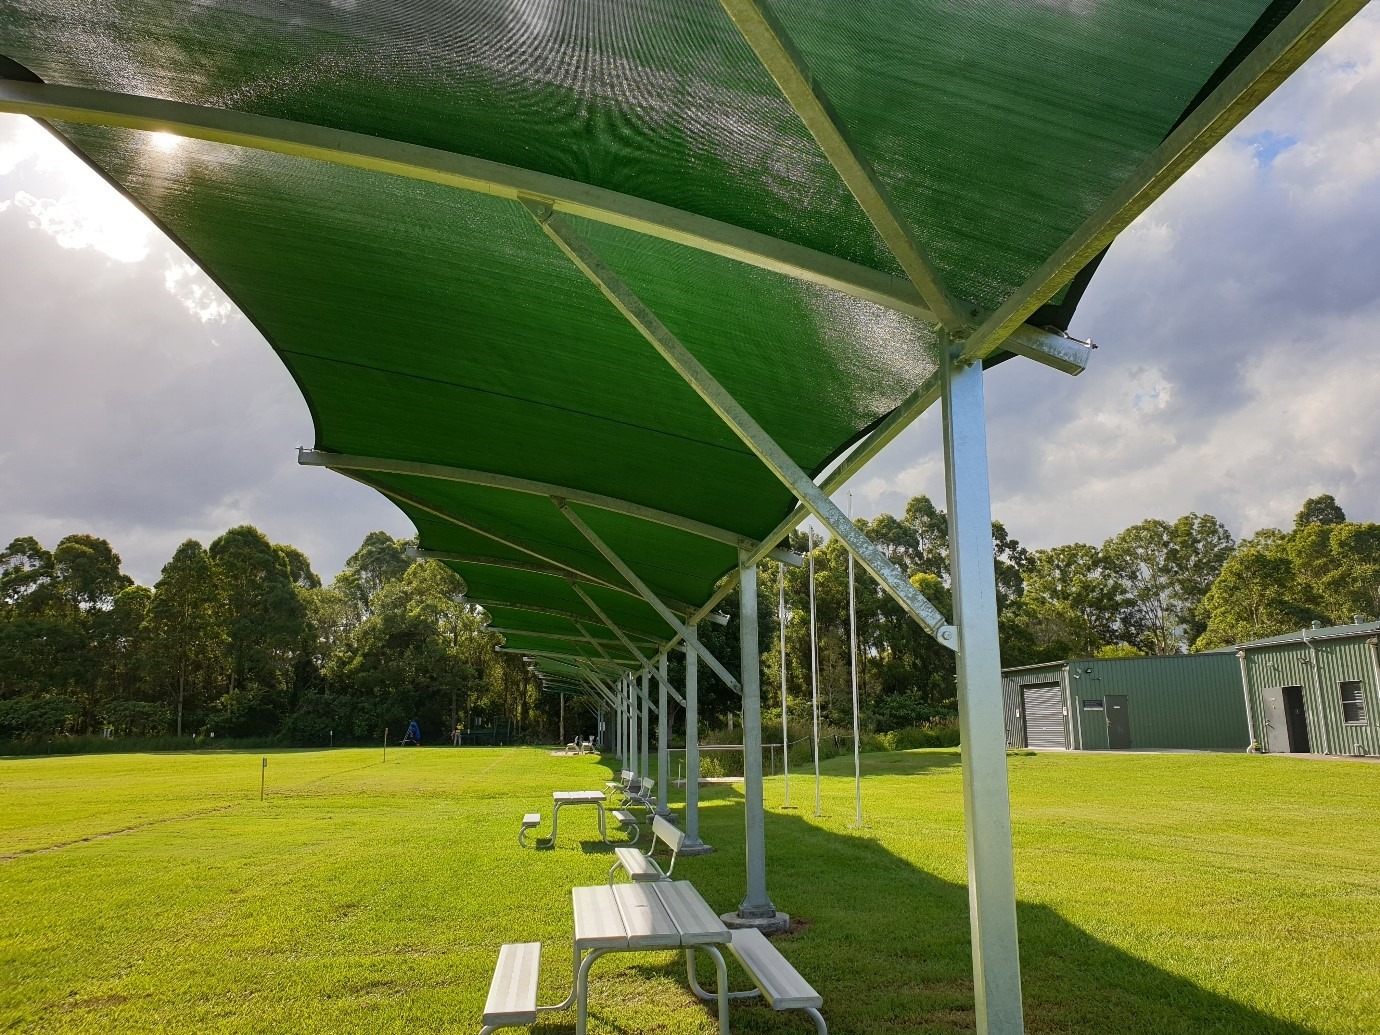 Shade structure installed for Samford Valley Archery Club by Versatile Structures